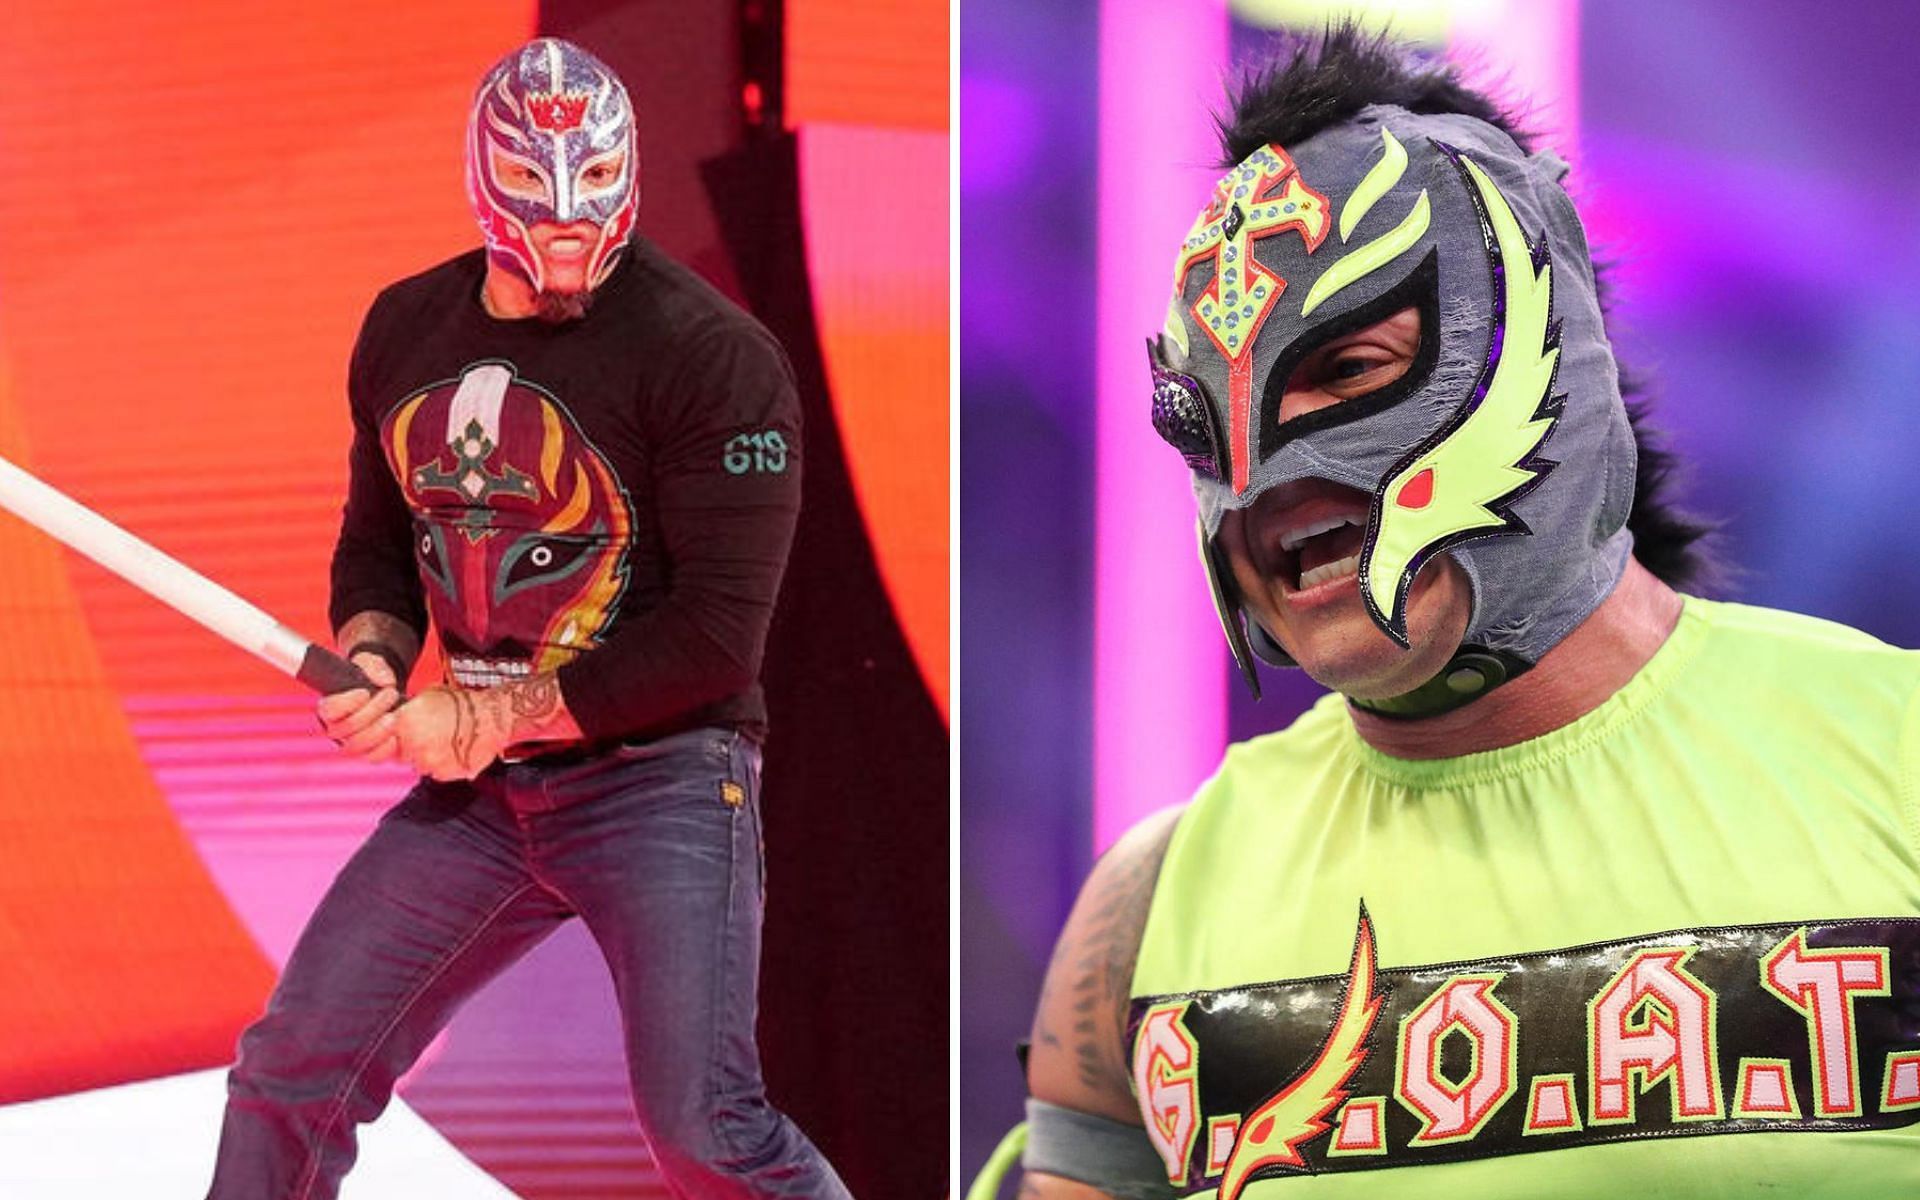 Rey Mysterio is a 3-time World Champion!